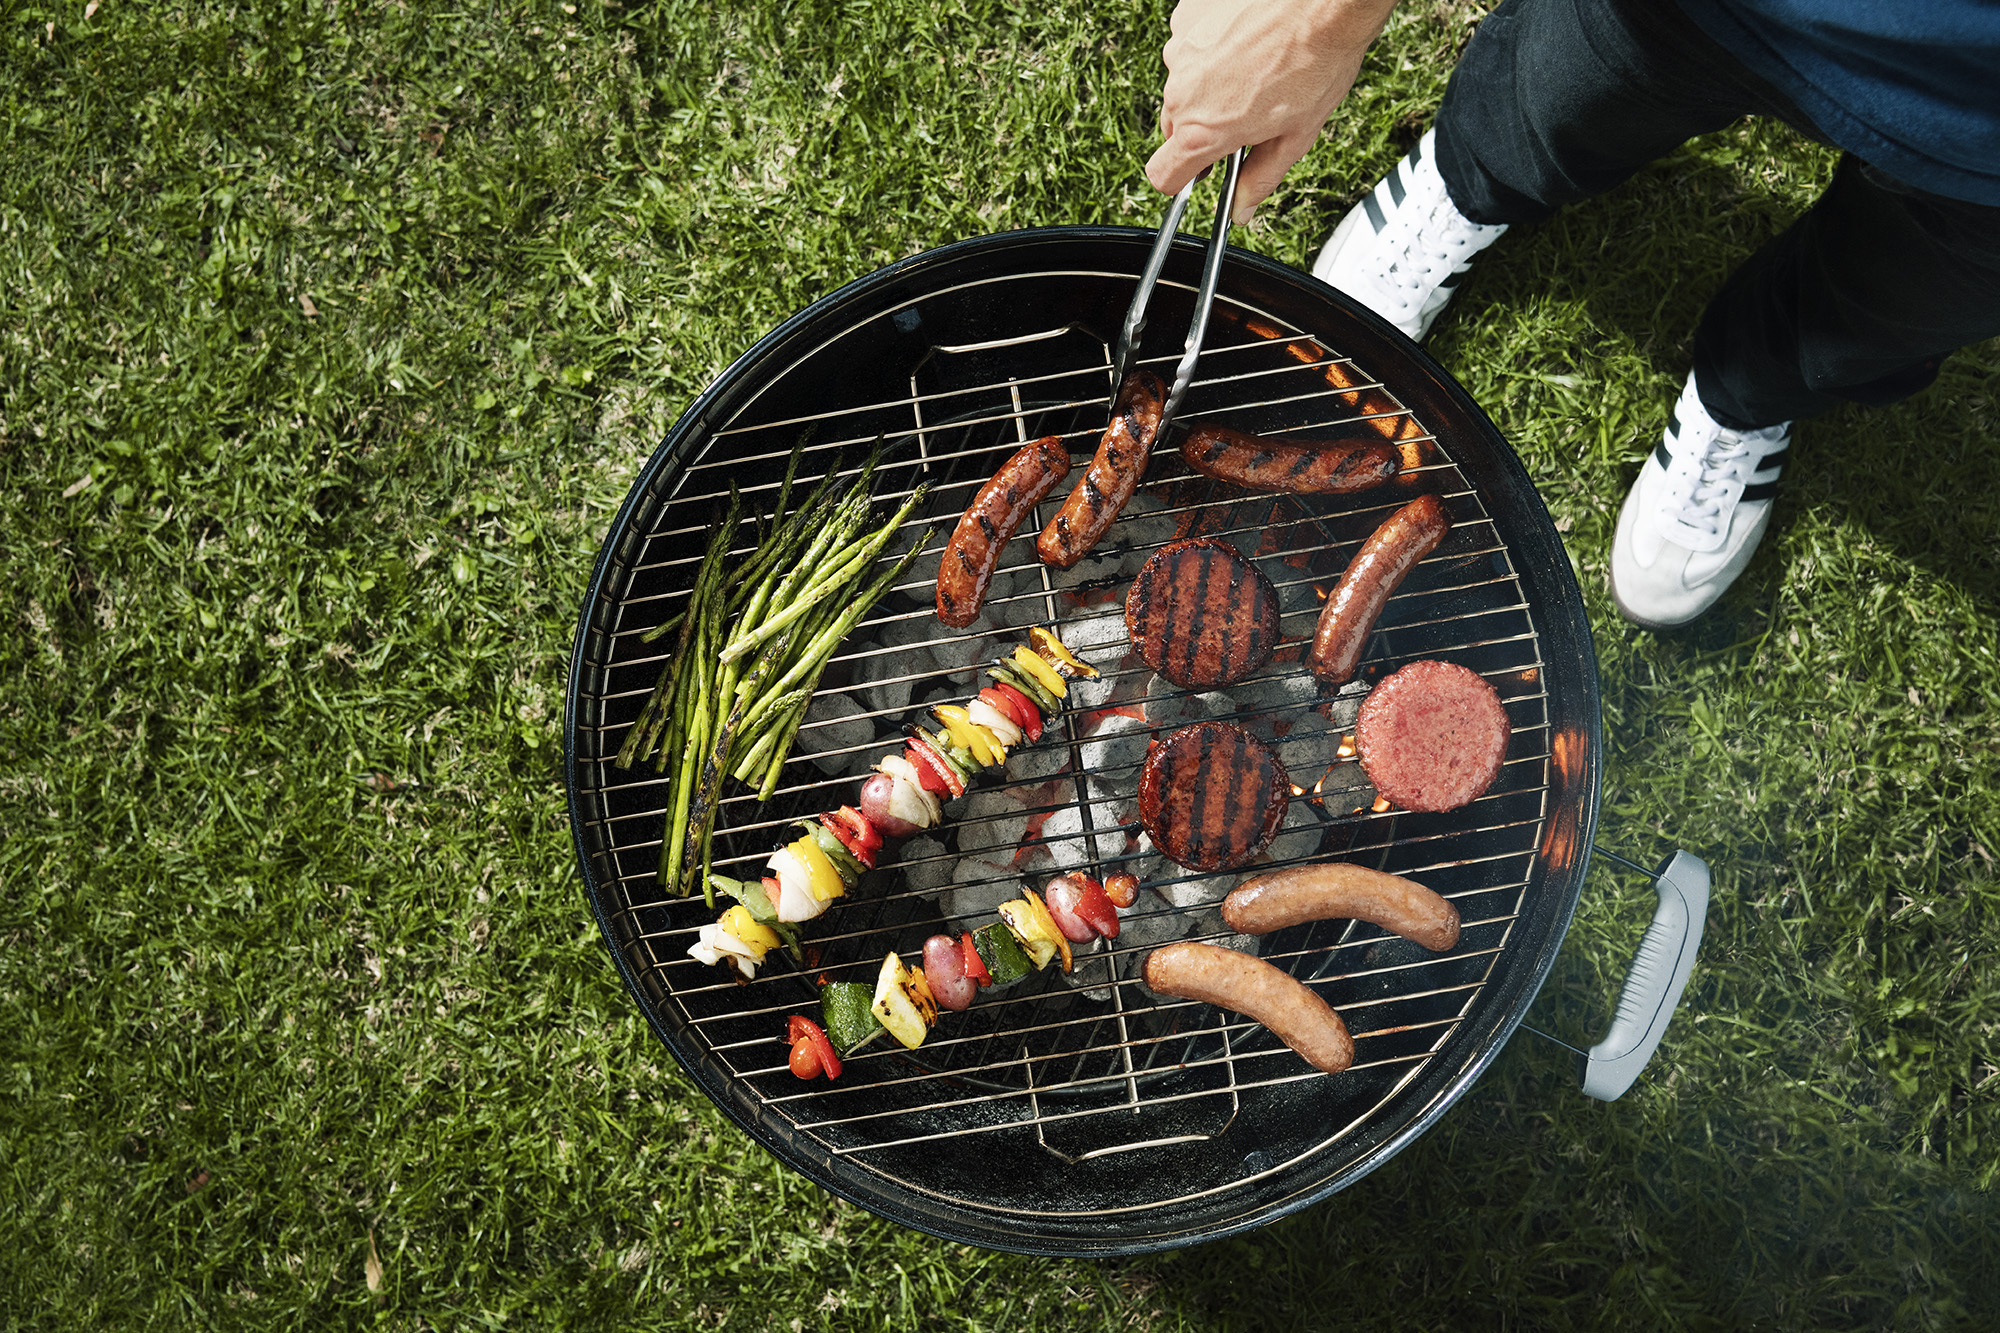 A man uses tongs to rotate food on a grill.